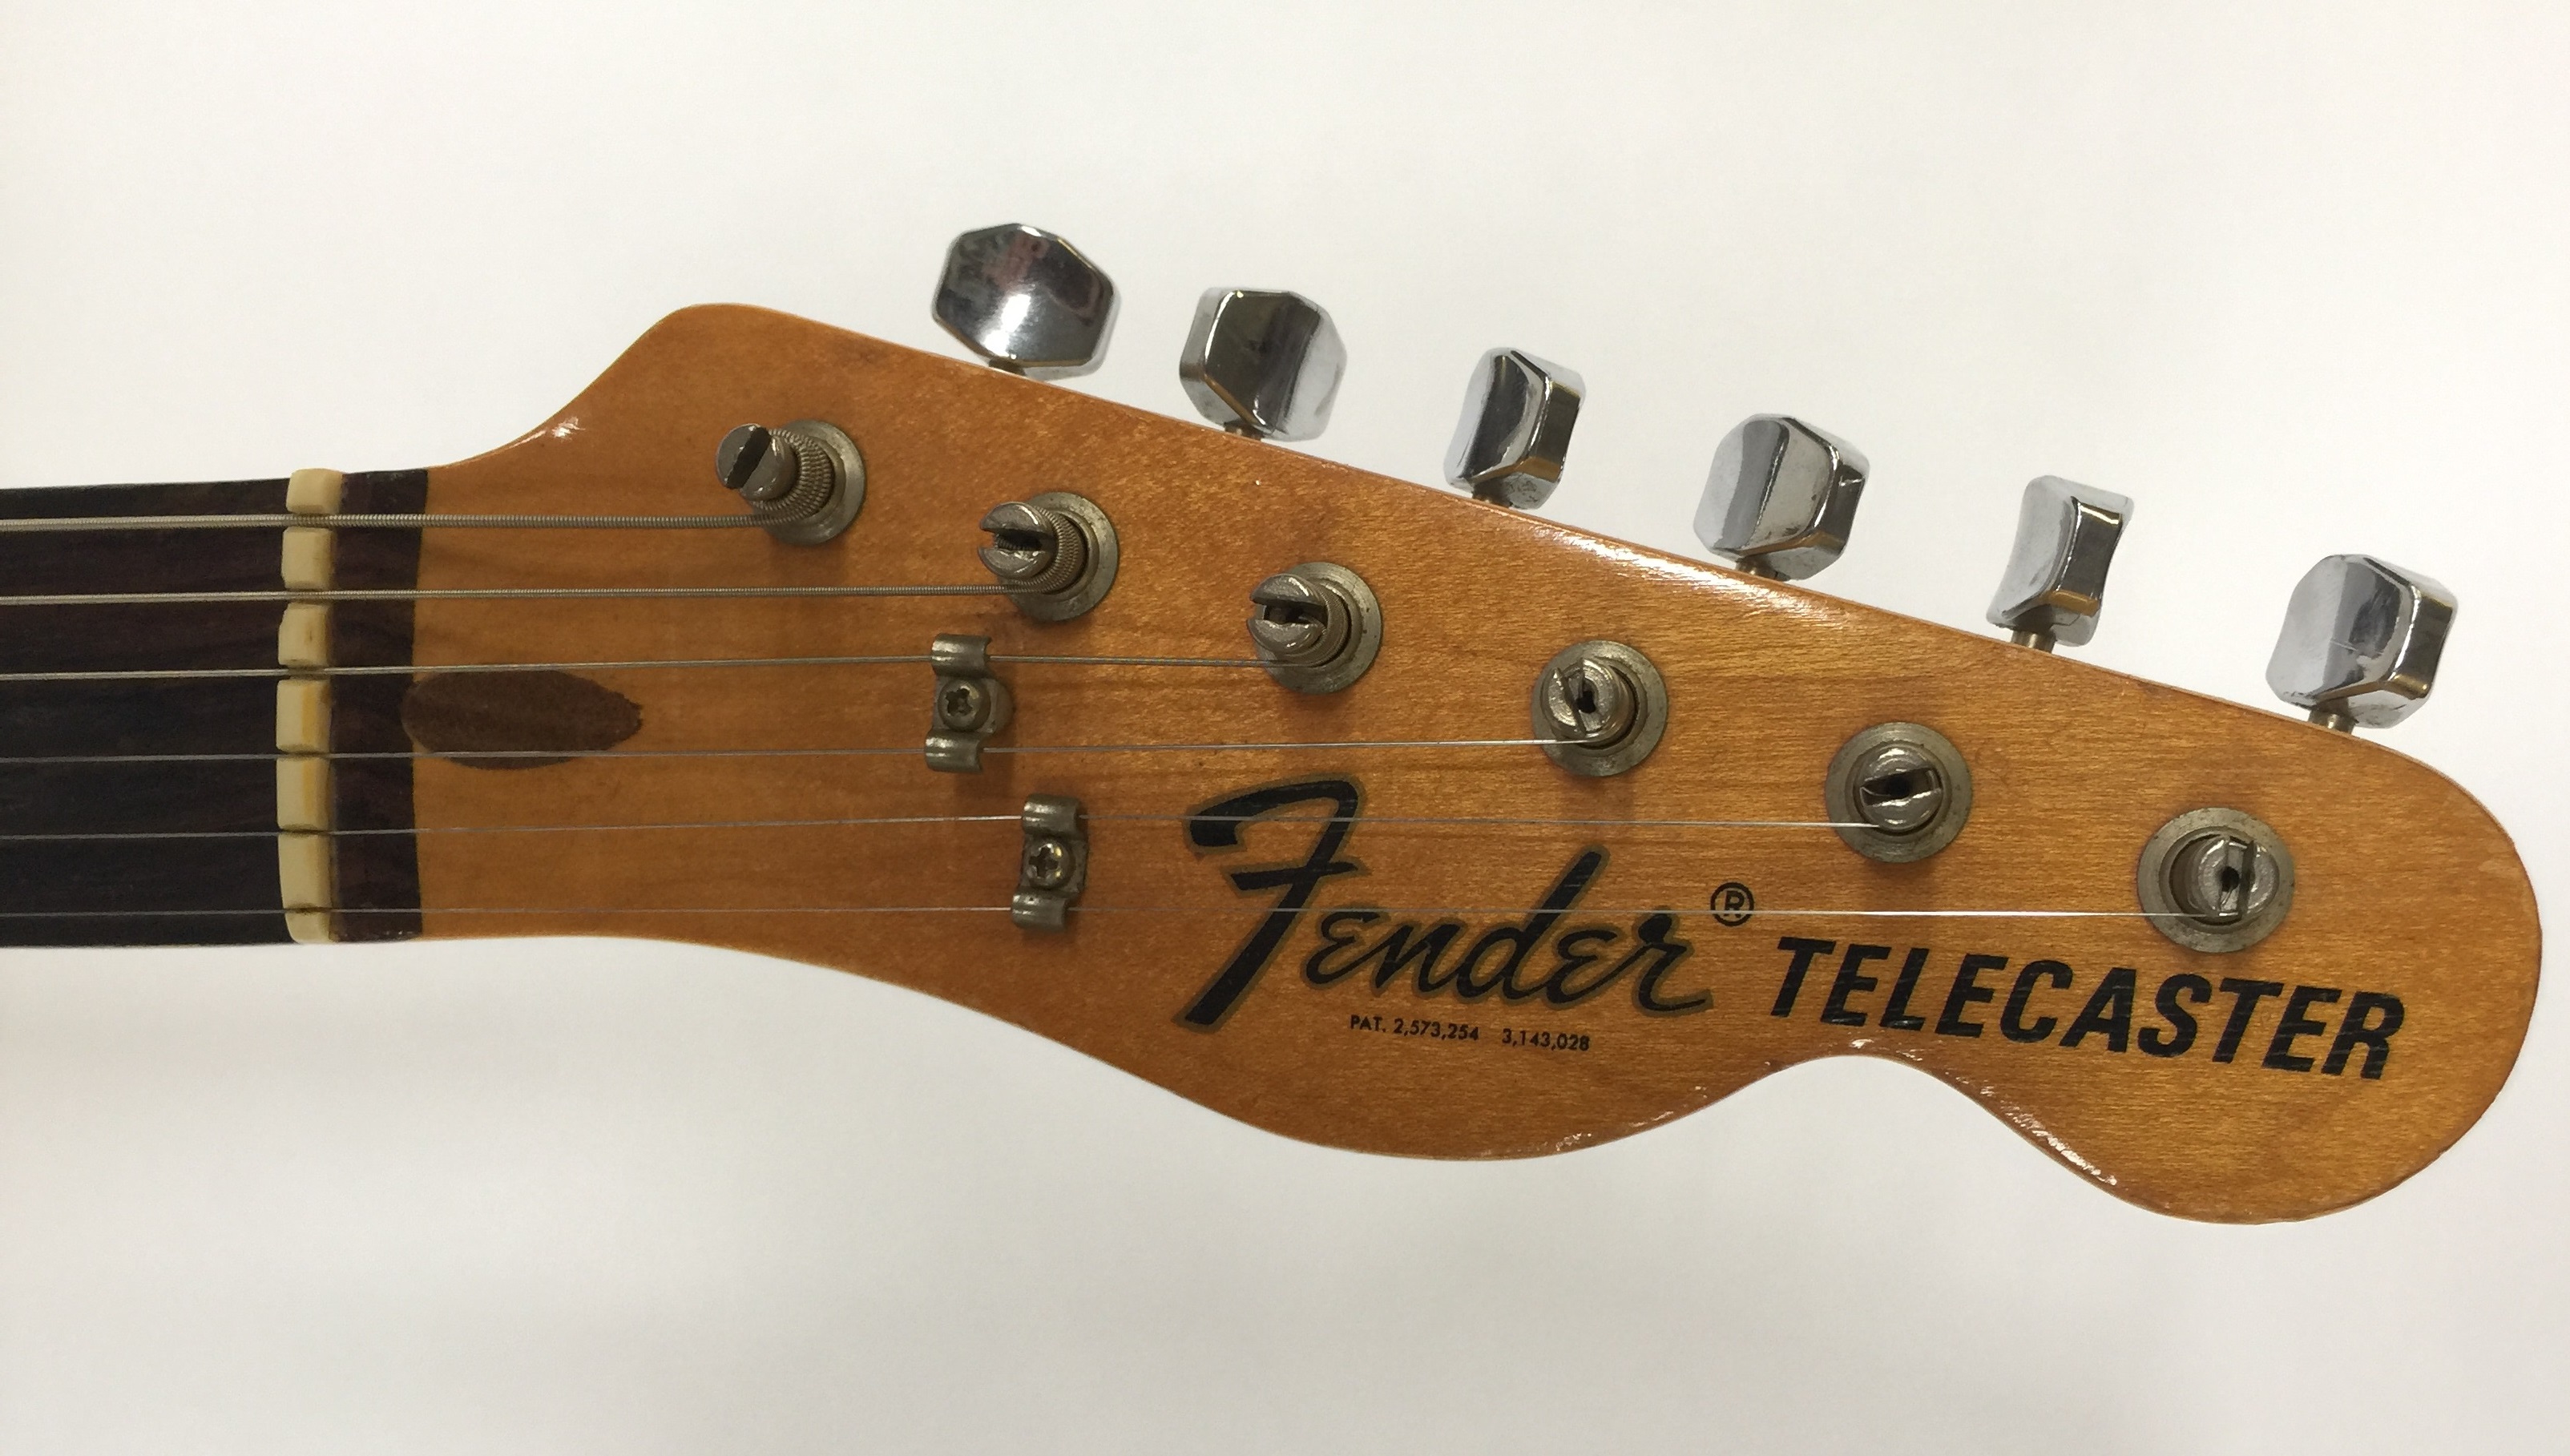 FENDER TELECASTER 1973 BLONDE - completely original and stunning example that has had one owner - Image 3 of 8